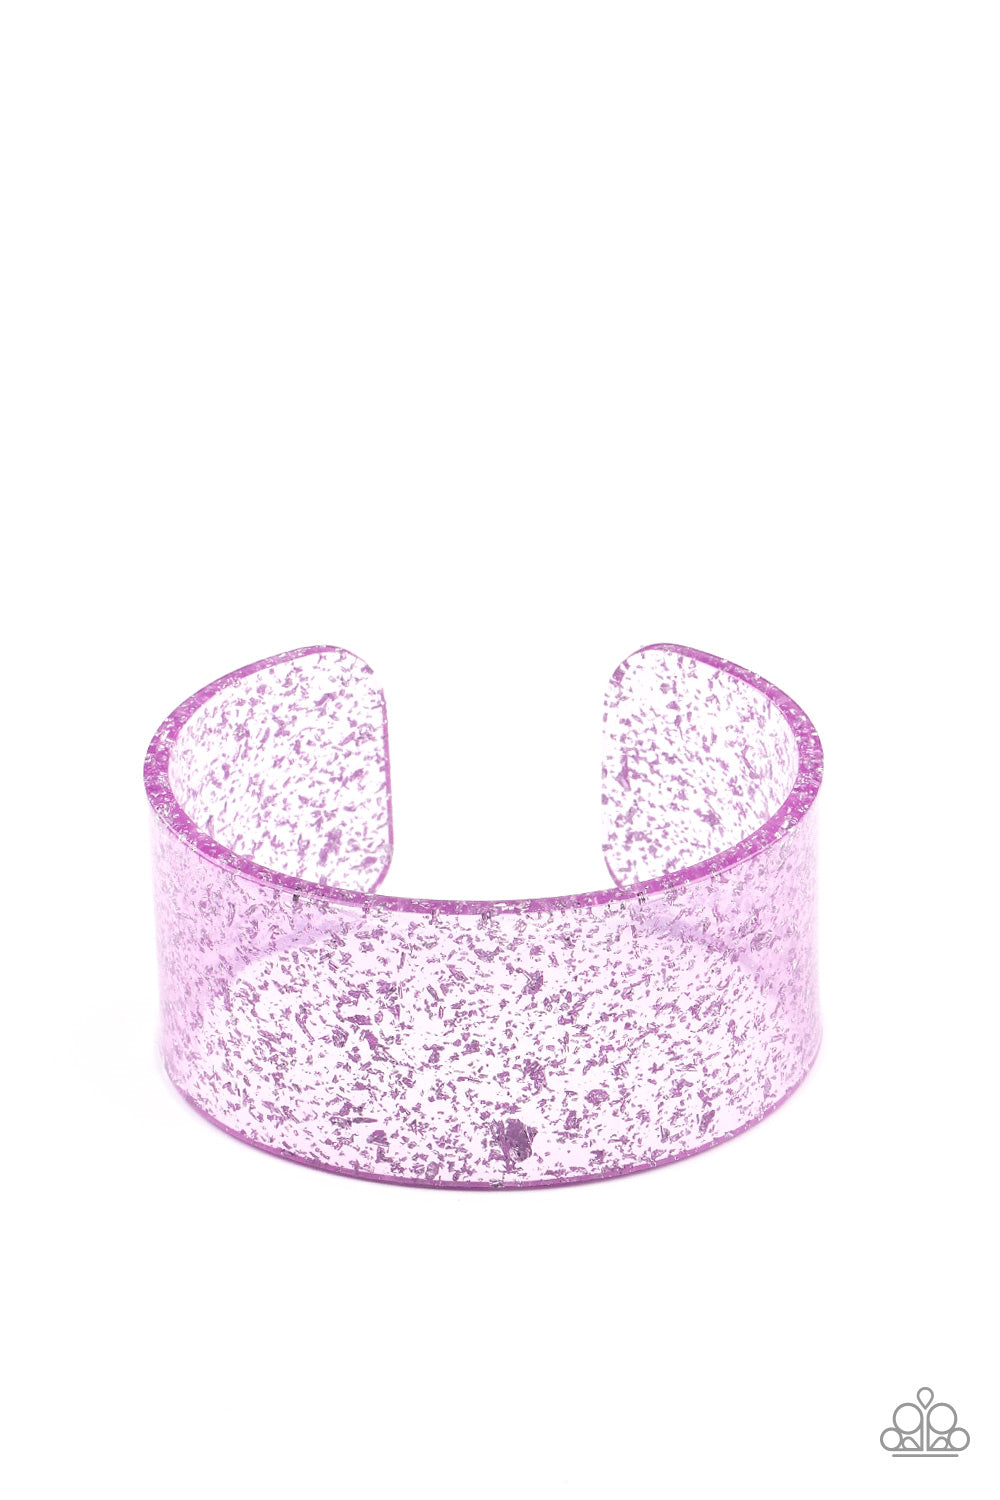 Snap, Crackle, Pop! Purple Cuff Bracelet - Paparazzi Accessories. Dainty silvery shavings are encased in a thick purple acrylic cuff, creating an icy incandescence around the wrist.  Sold as one individual bracelet.